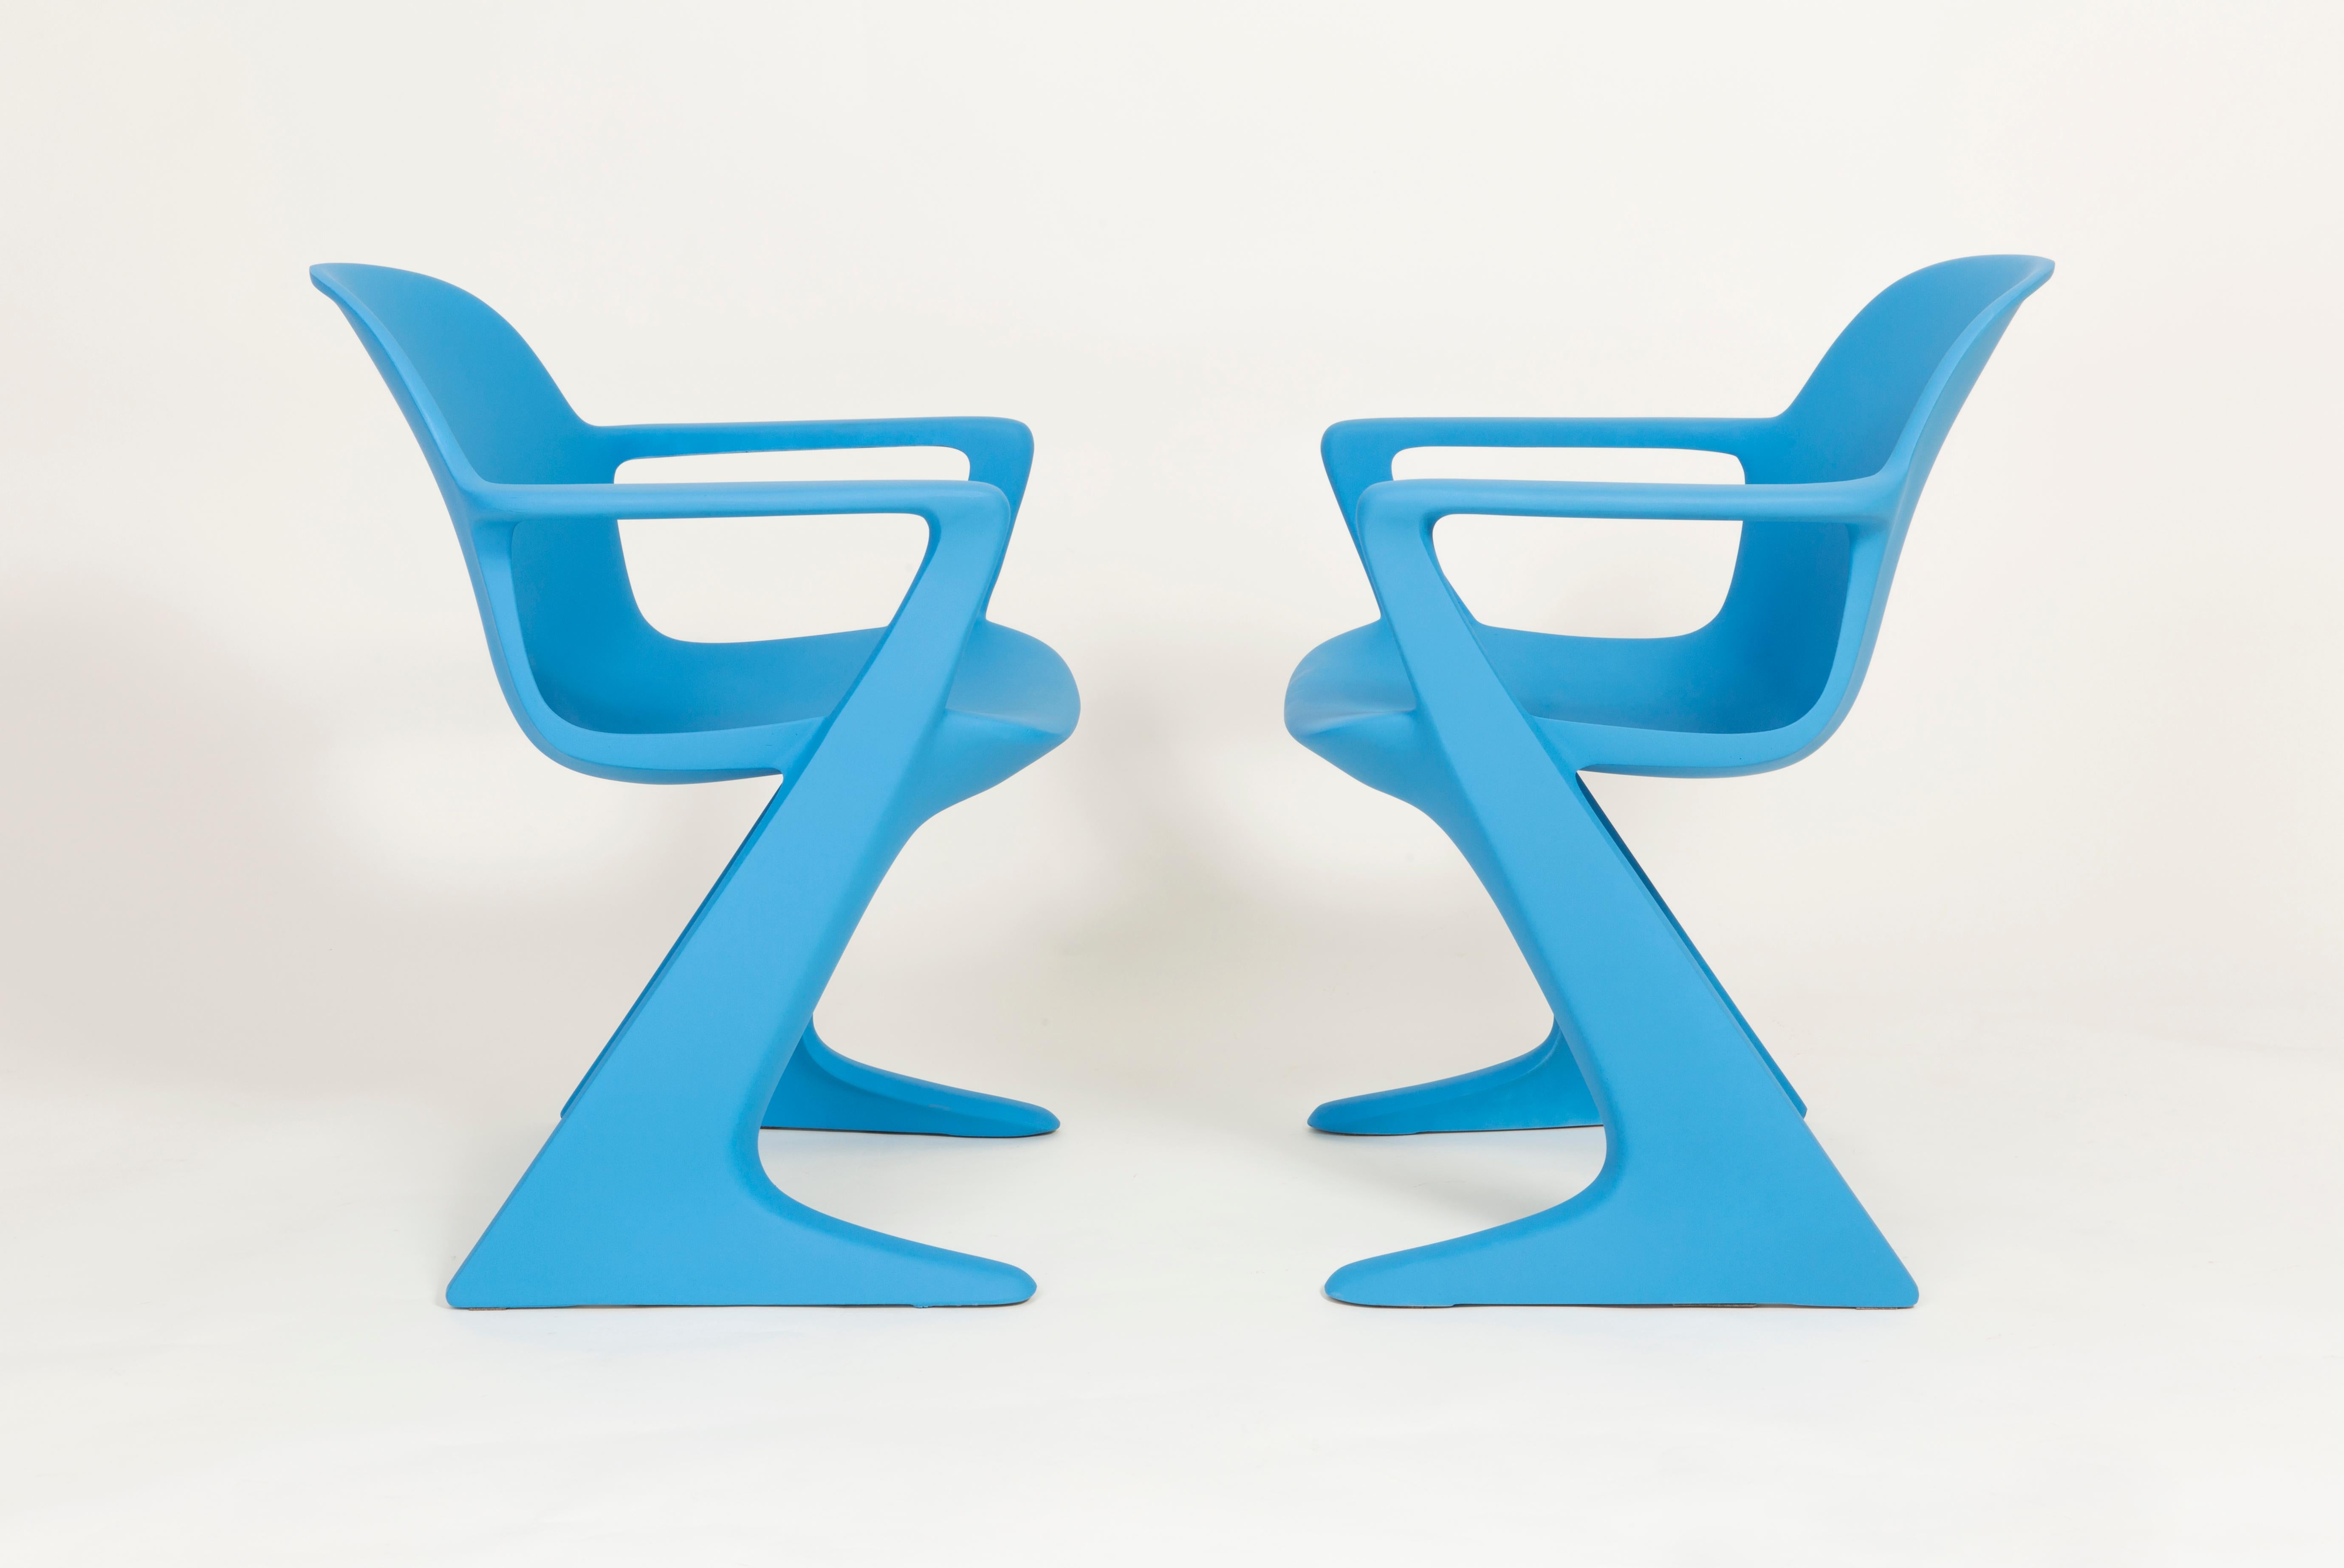 Mid-Century Modern Set of Two Blue Kangaroo Chairs Designed by Ernst Moeckl, Germany, 1968 For Sale